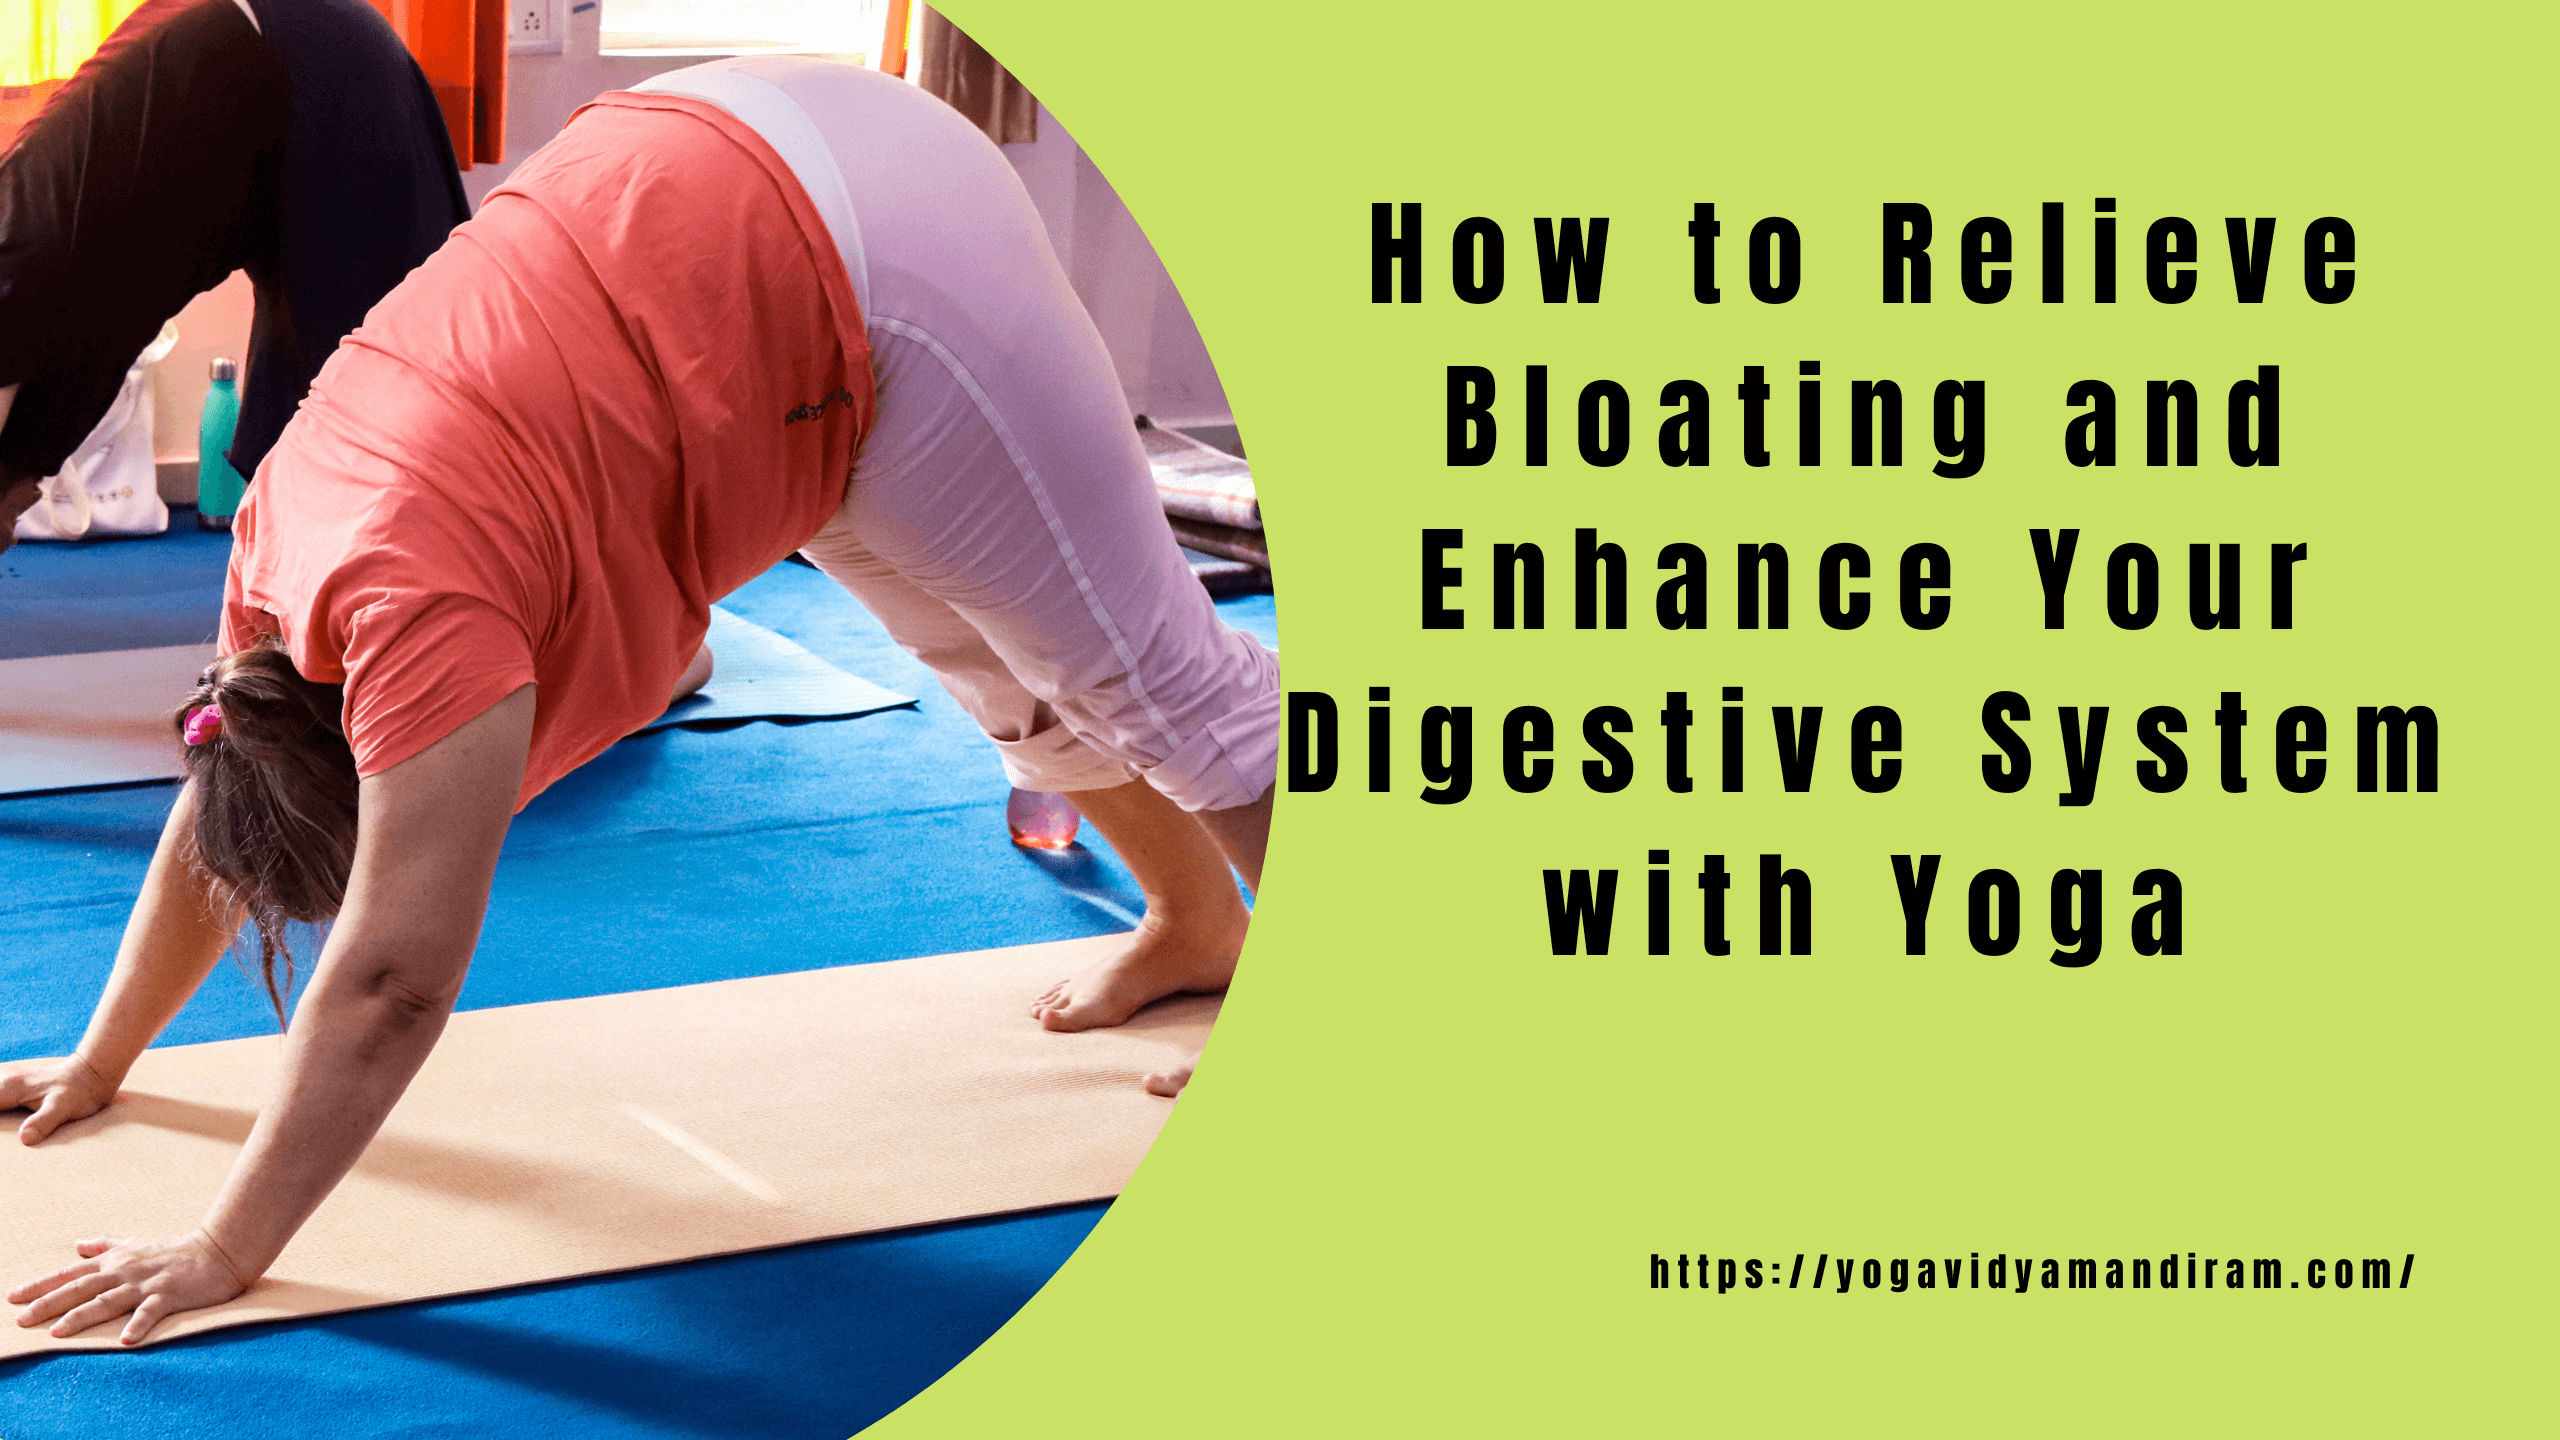 How to Relieve Bloating and Enhance Your Digestive System with Yoga